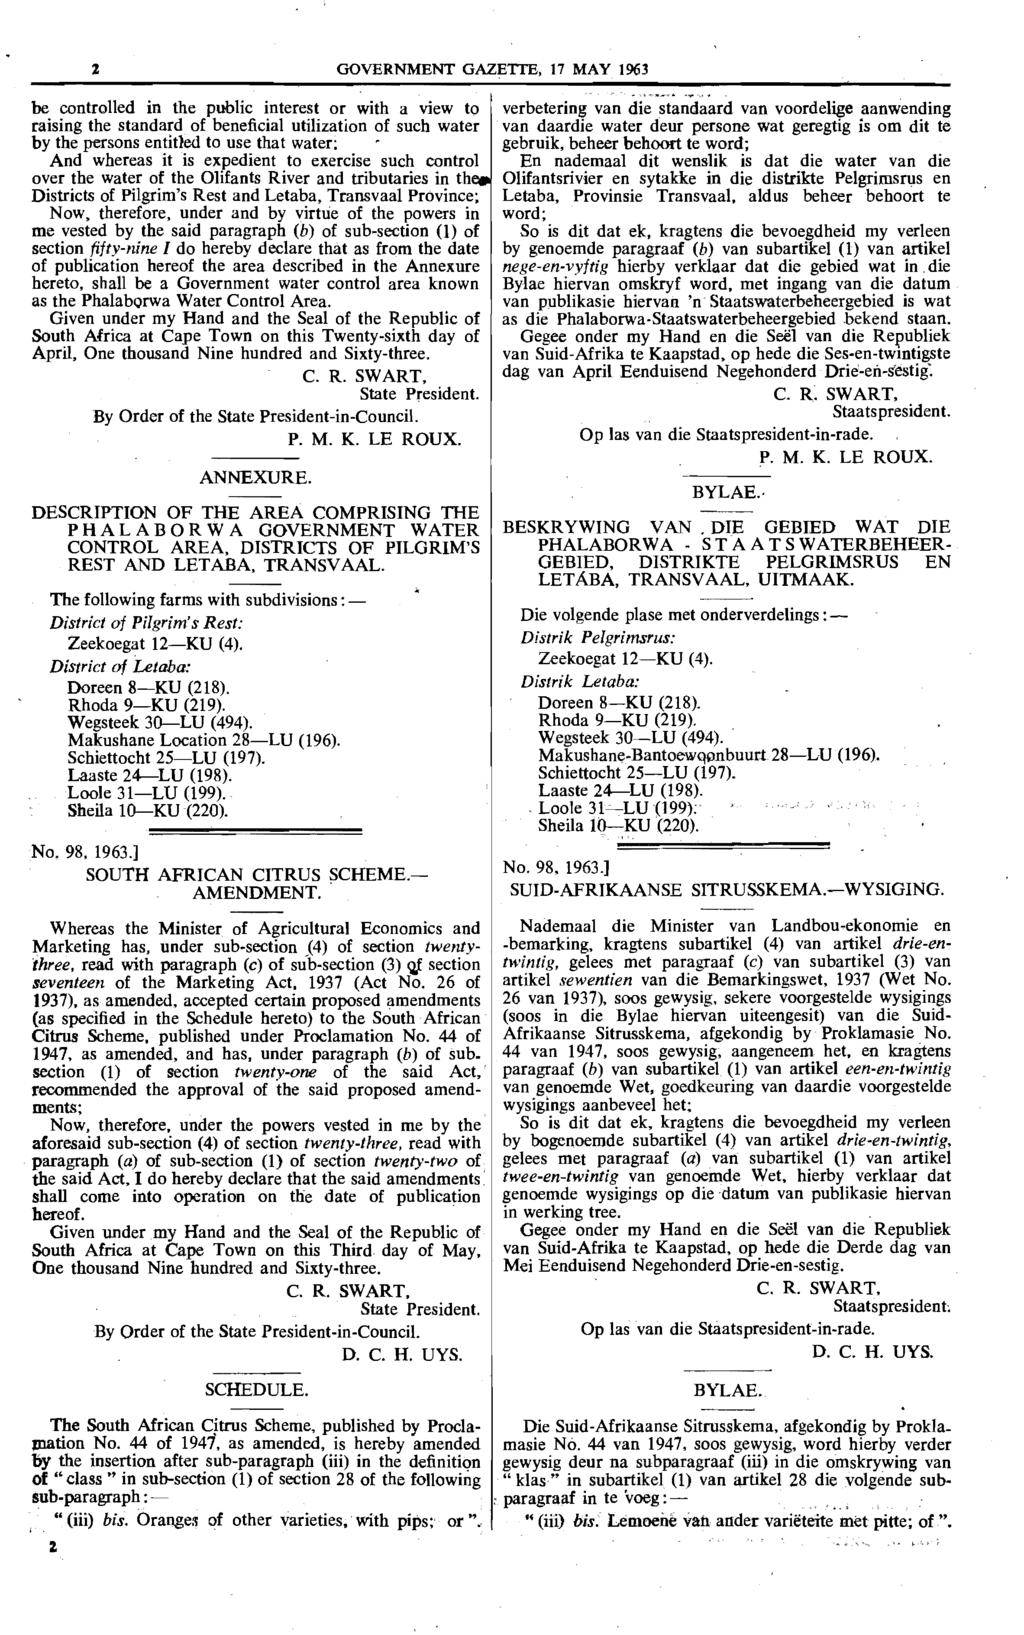 2 GOVERNMENT GAZETTE, 17 MAY 1963 be controlled in the public interest or with a view to raising the standard of beneficial utilization of such water by the persons entitled to use that water: And